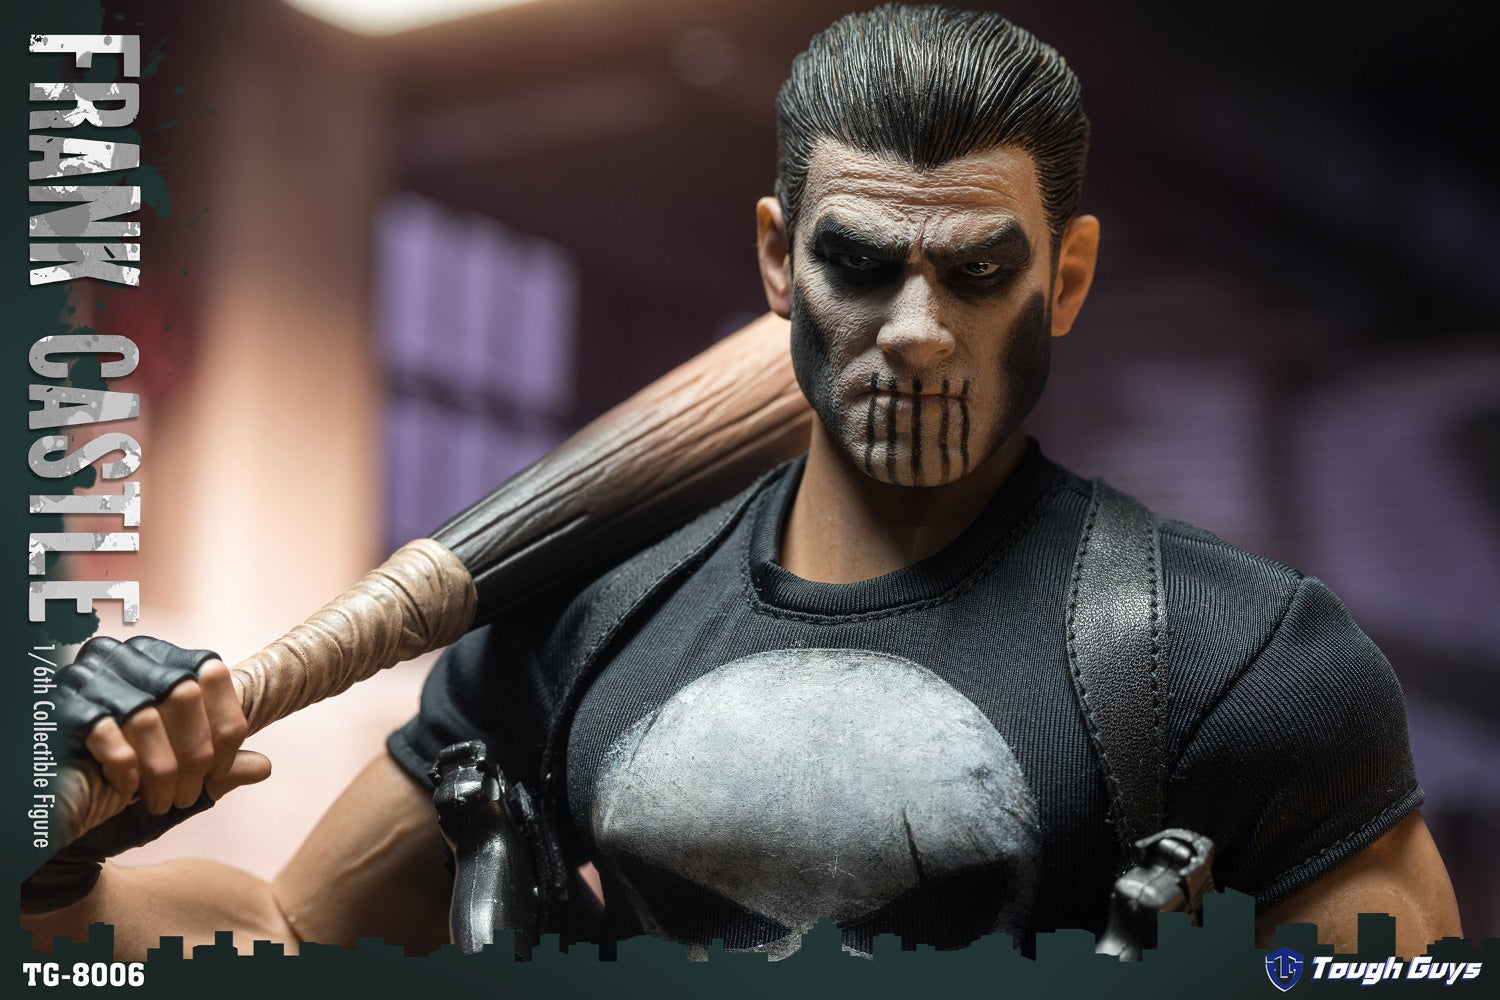 Tough Guys Comic Book/Punisher PS2 Frank Castle just announced. : r/hottoys